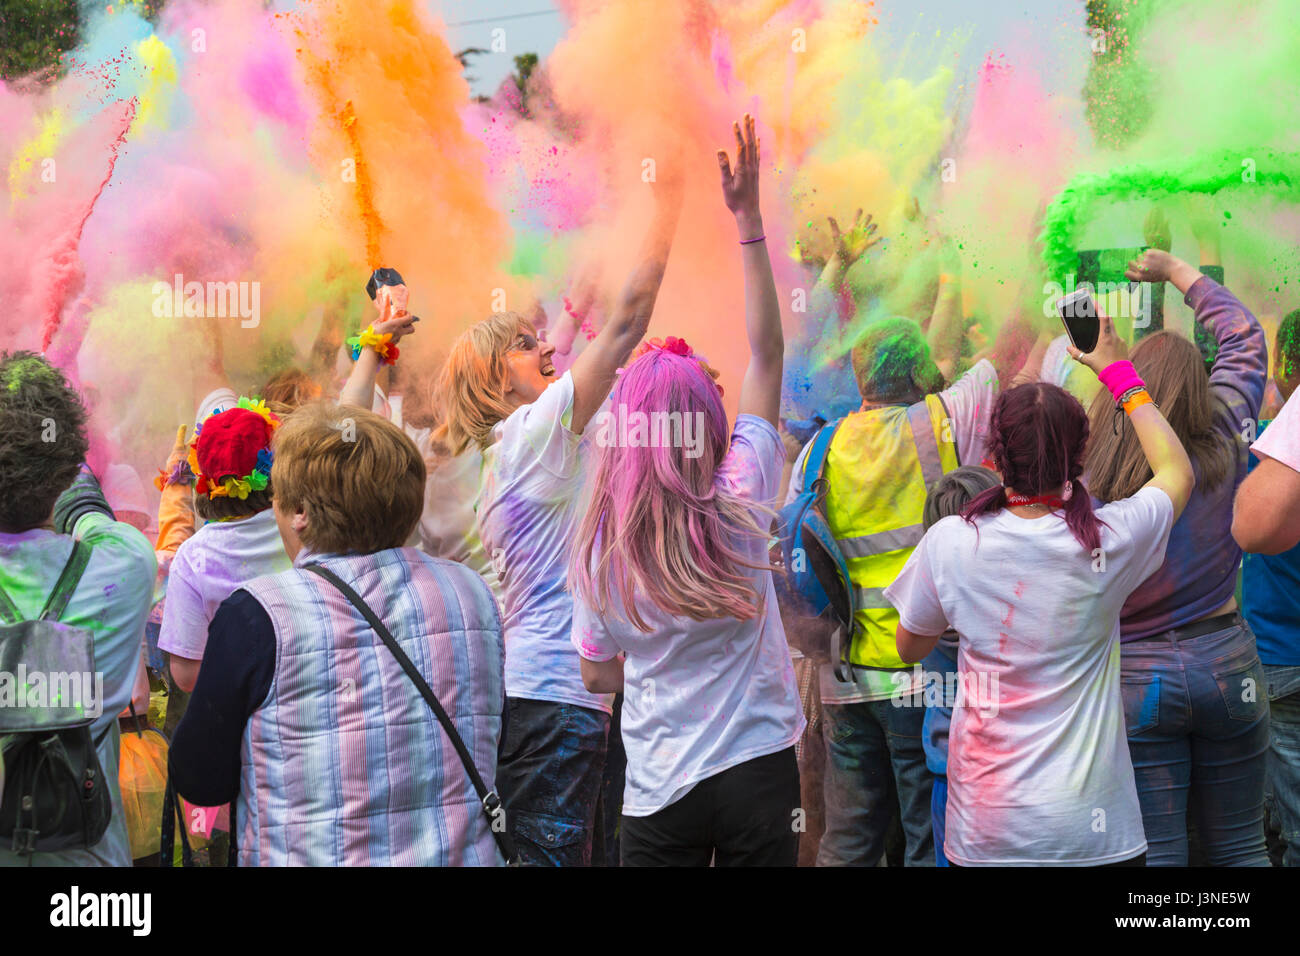 Weymouth, Dorset, UK. 6th May, 2017. Weldmar's Colour Run takes place at Weymouth to raise funds for the charity. Families participate in the event and have fun getting covered in brightly coloured powder paint. Credit: Carolyn Jenkins/Alamy Live News Stock Photo